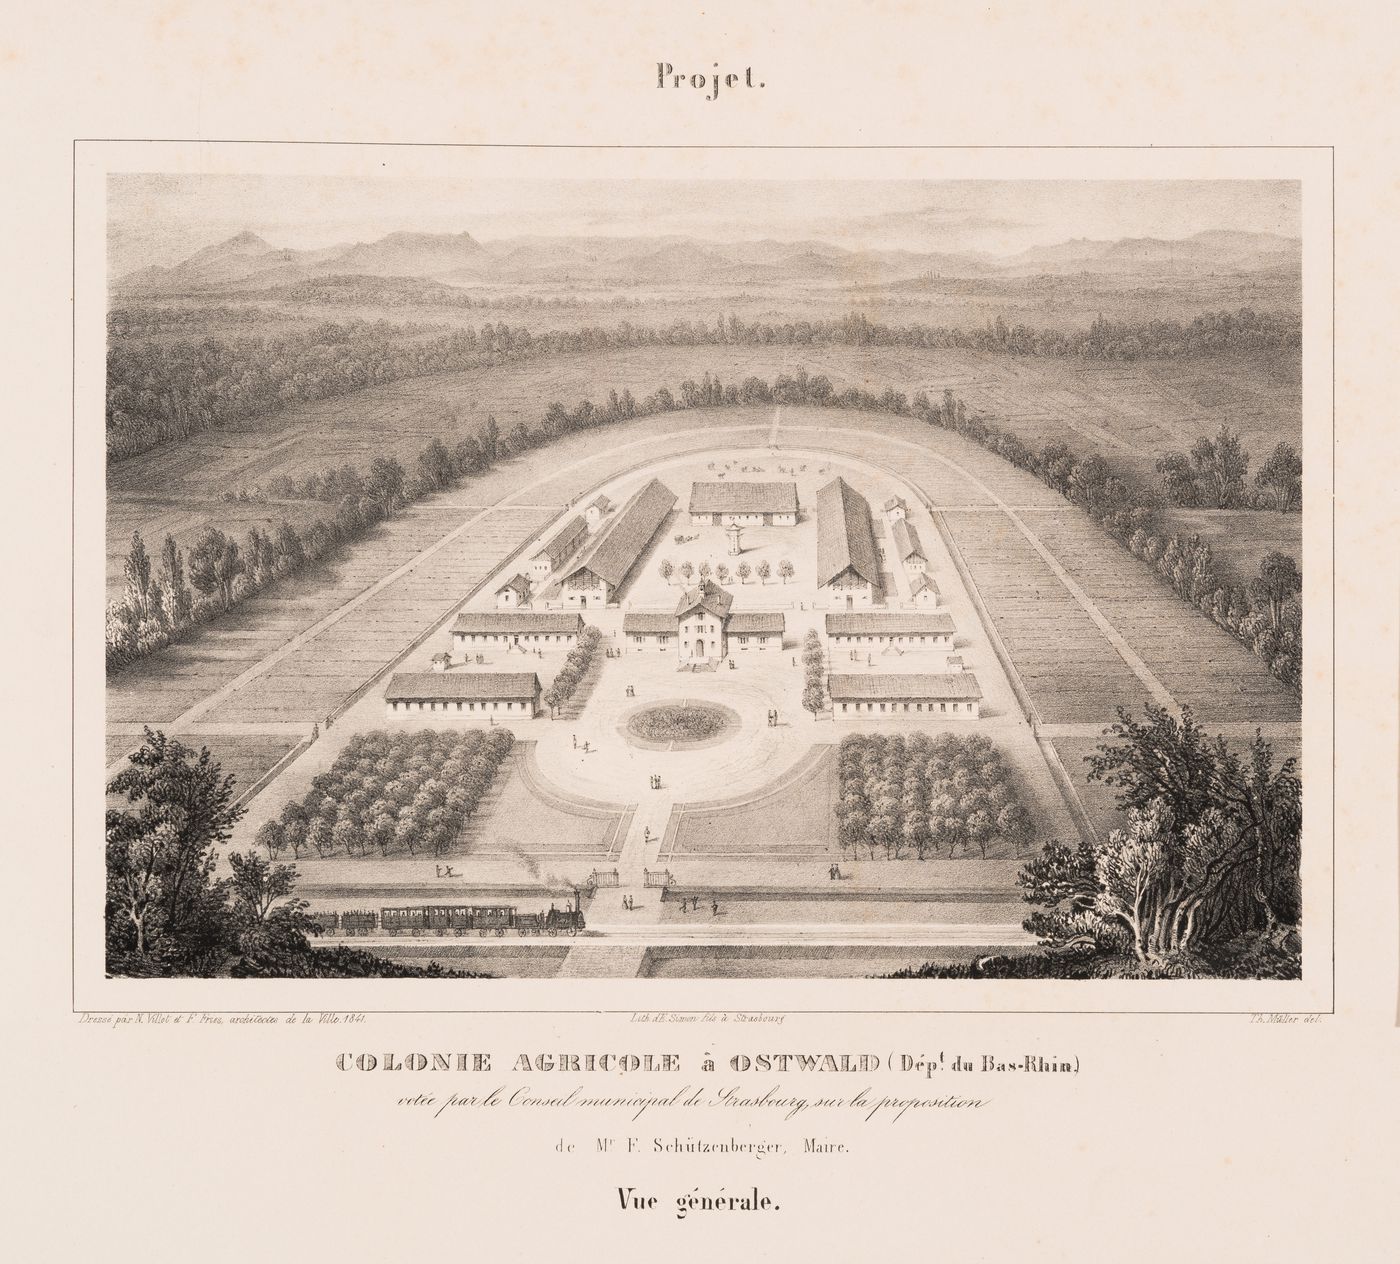 Agricultural colony, Ostwald, France: Bird's-eye view